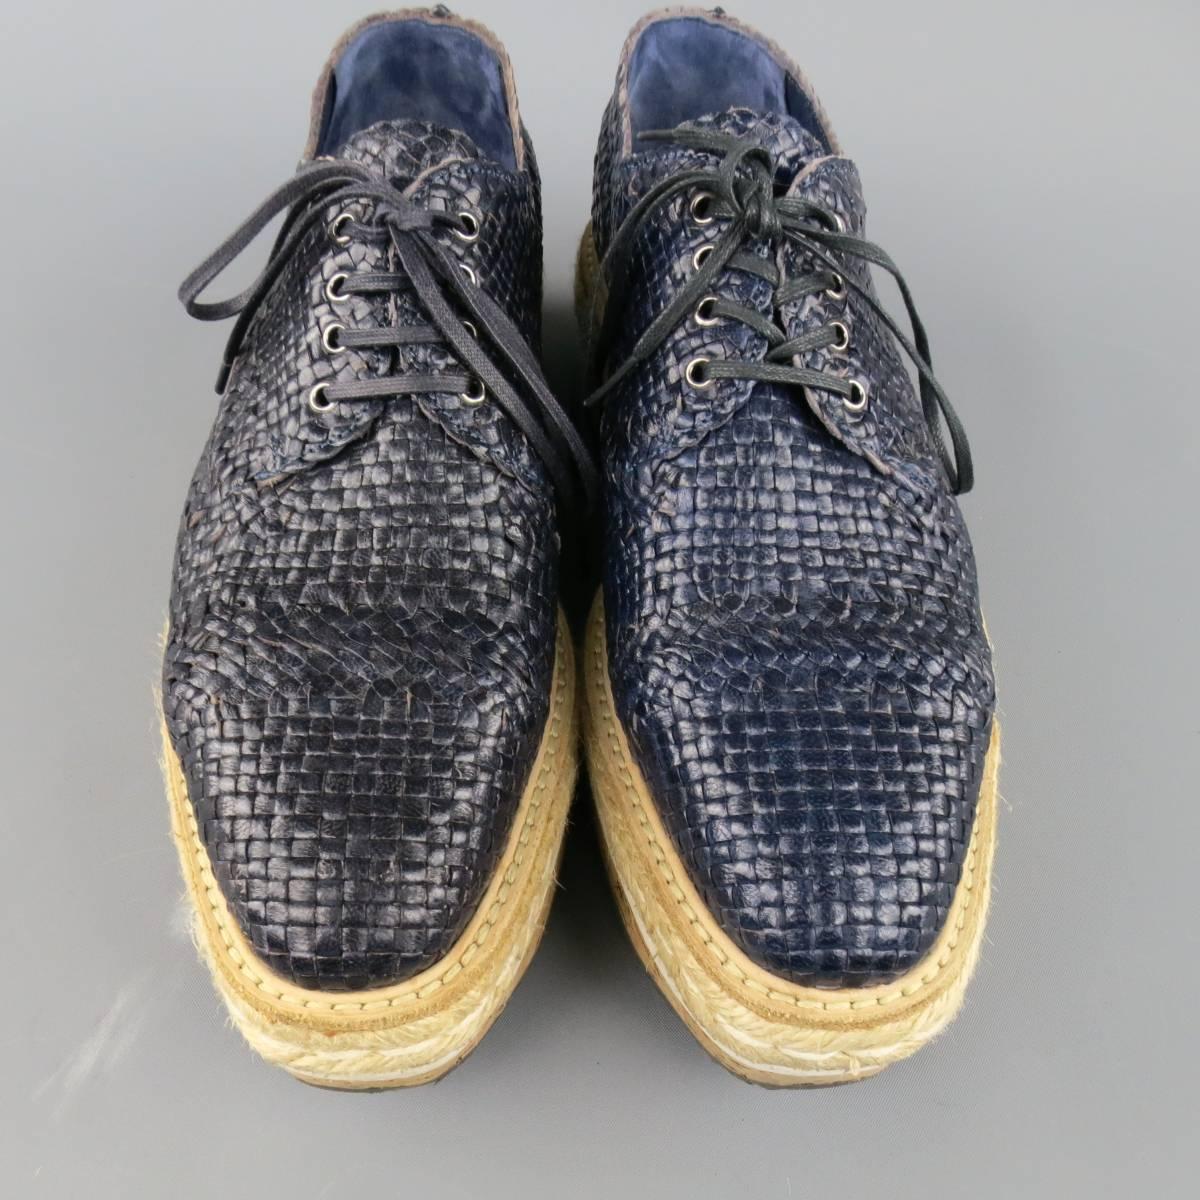 woven leather dress shoes